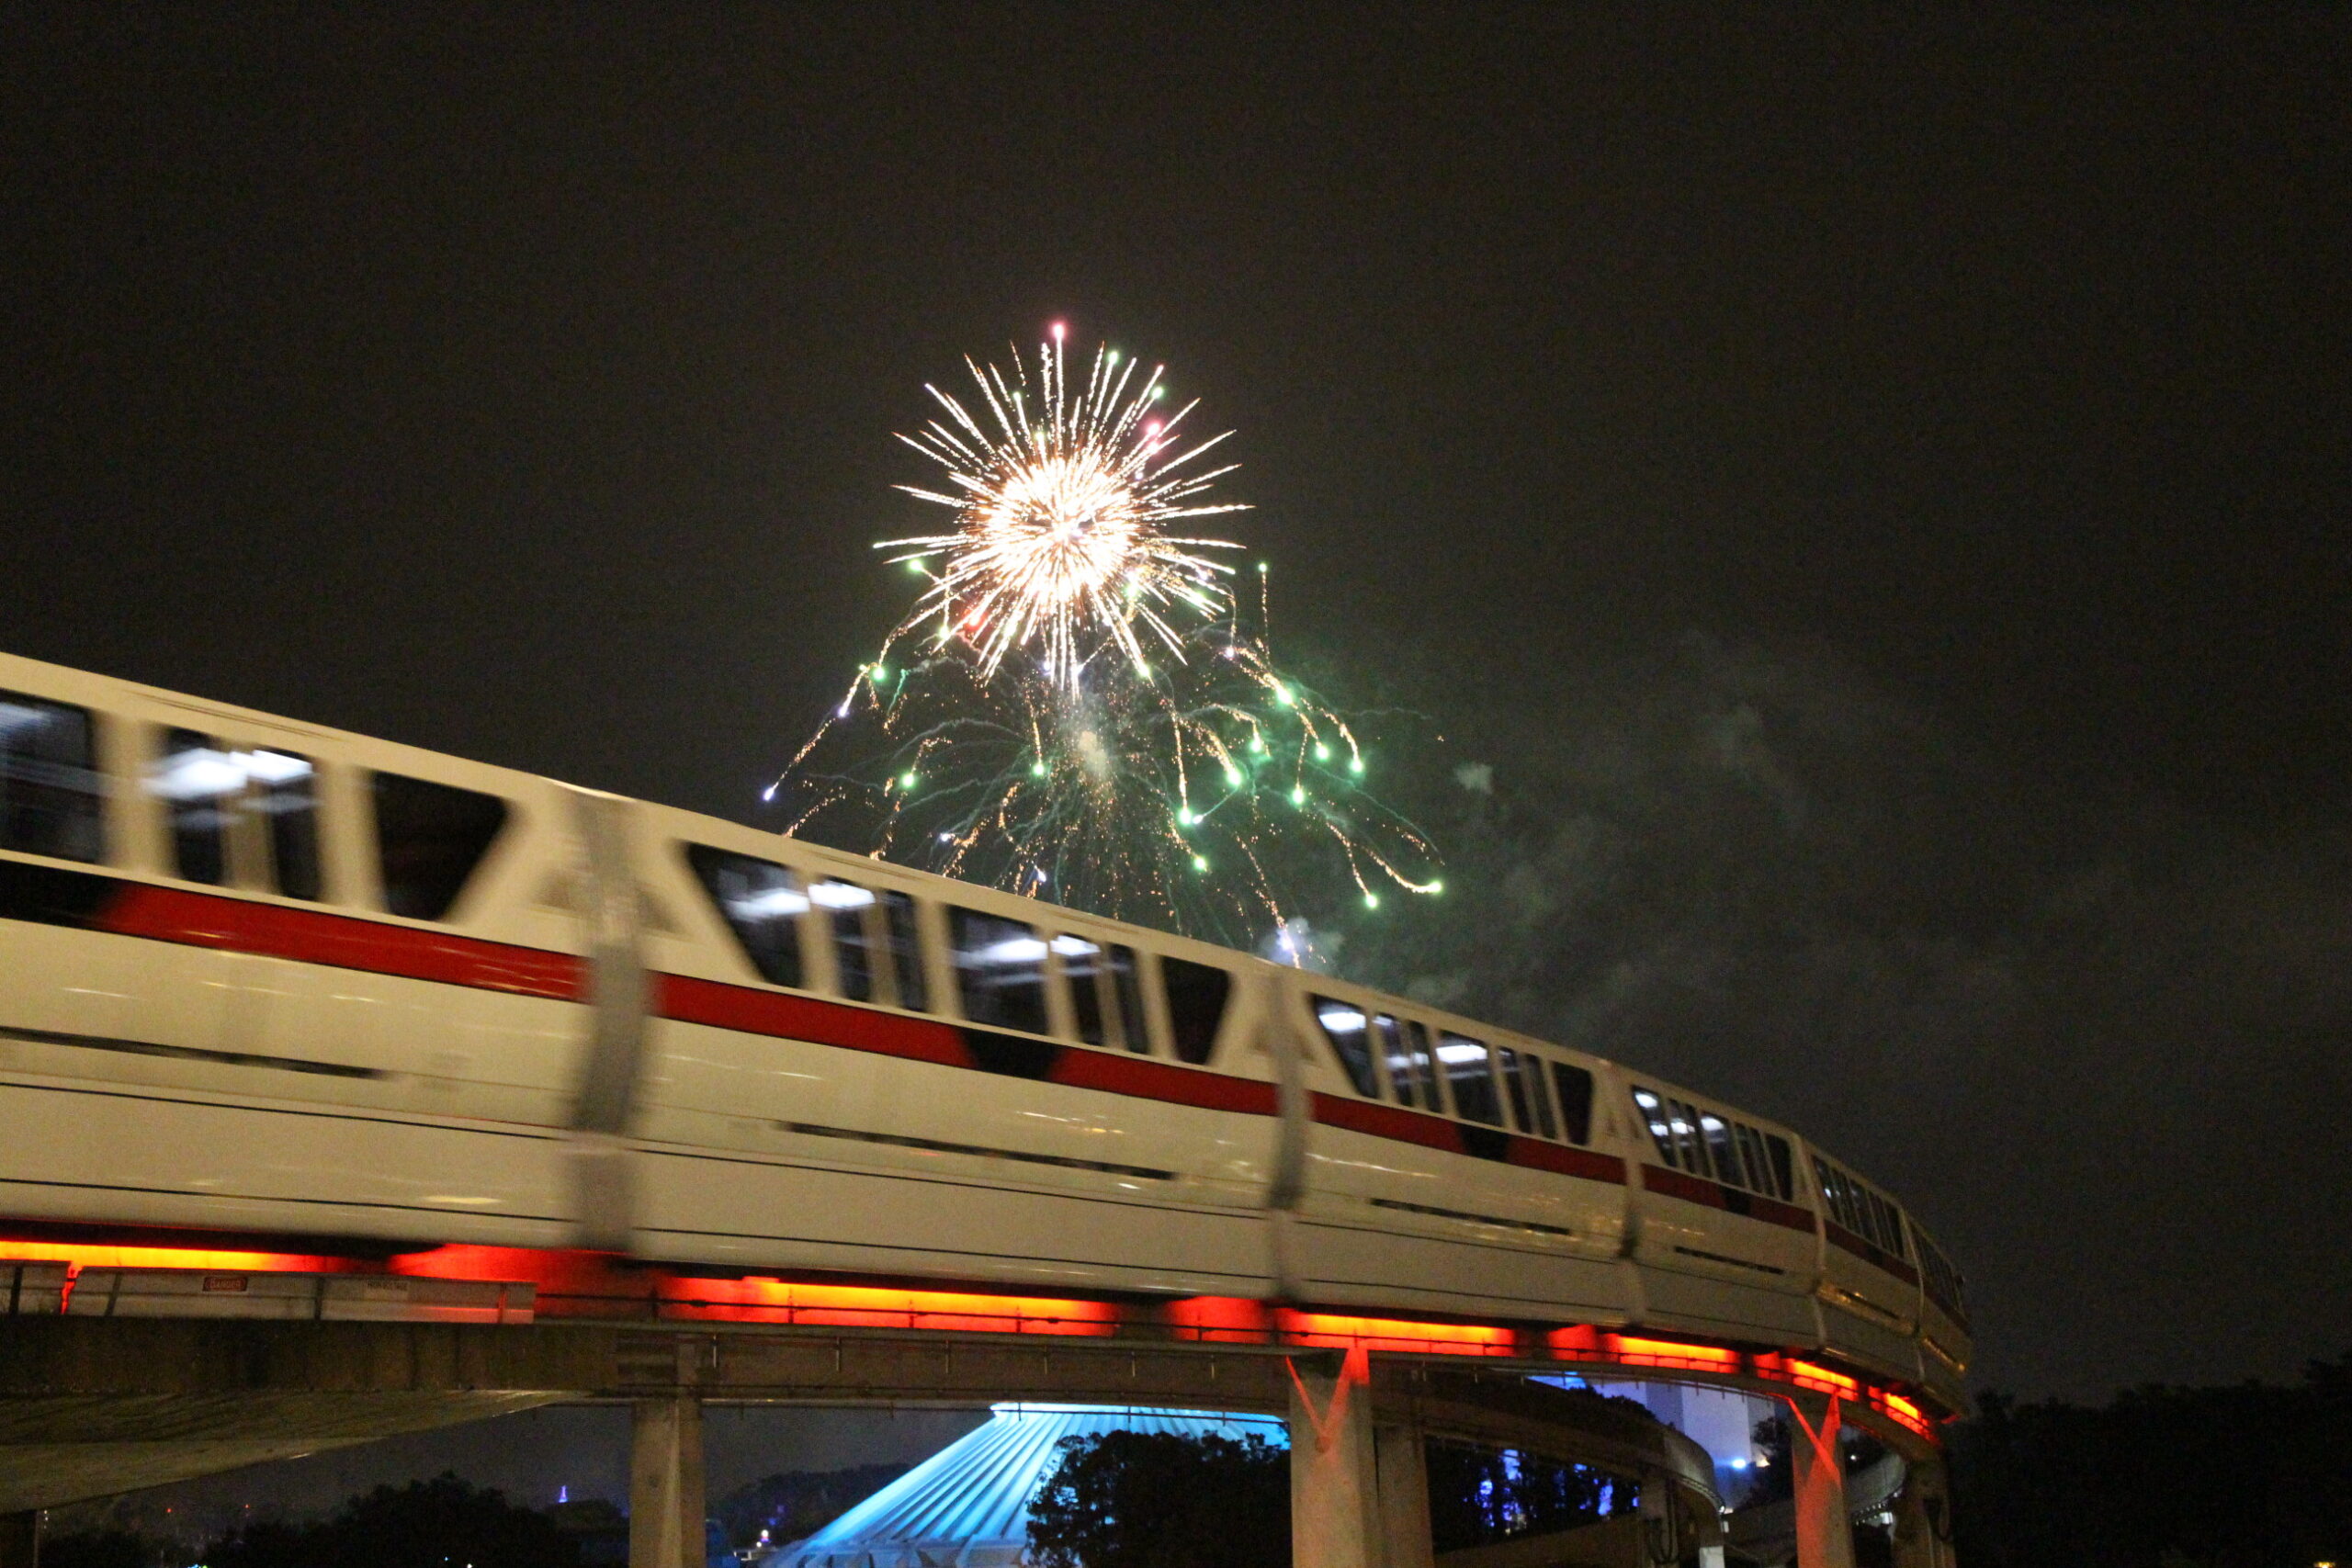 Monorail whizzing by a dark sky with Magic Kingdom fireworks overhead